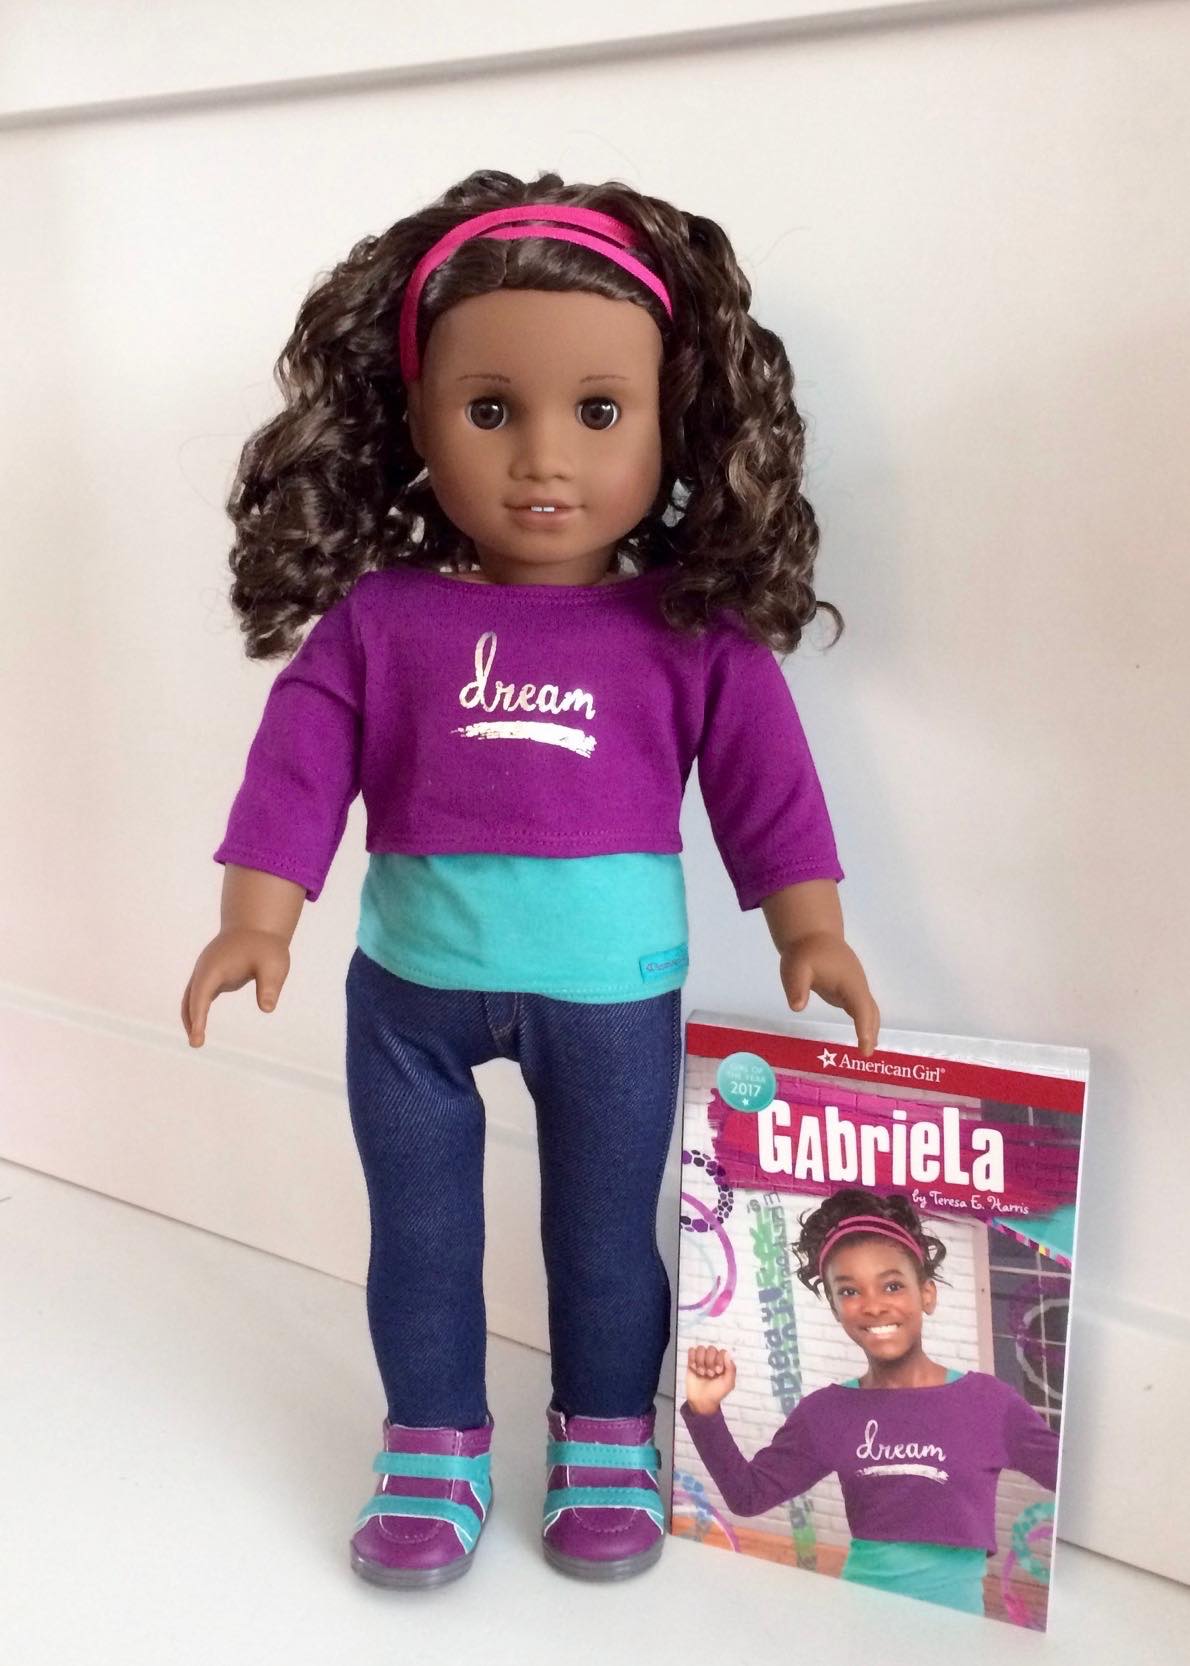 REVIEW: American Girl's Gabriela is an 